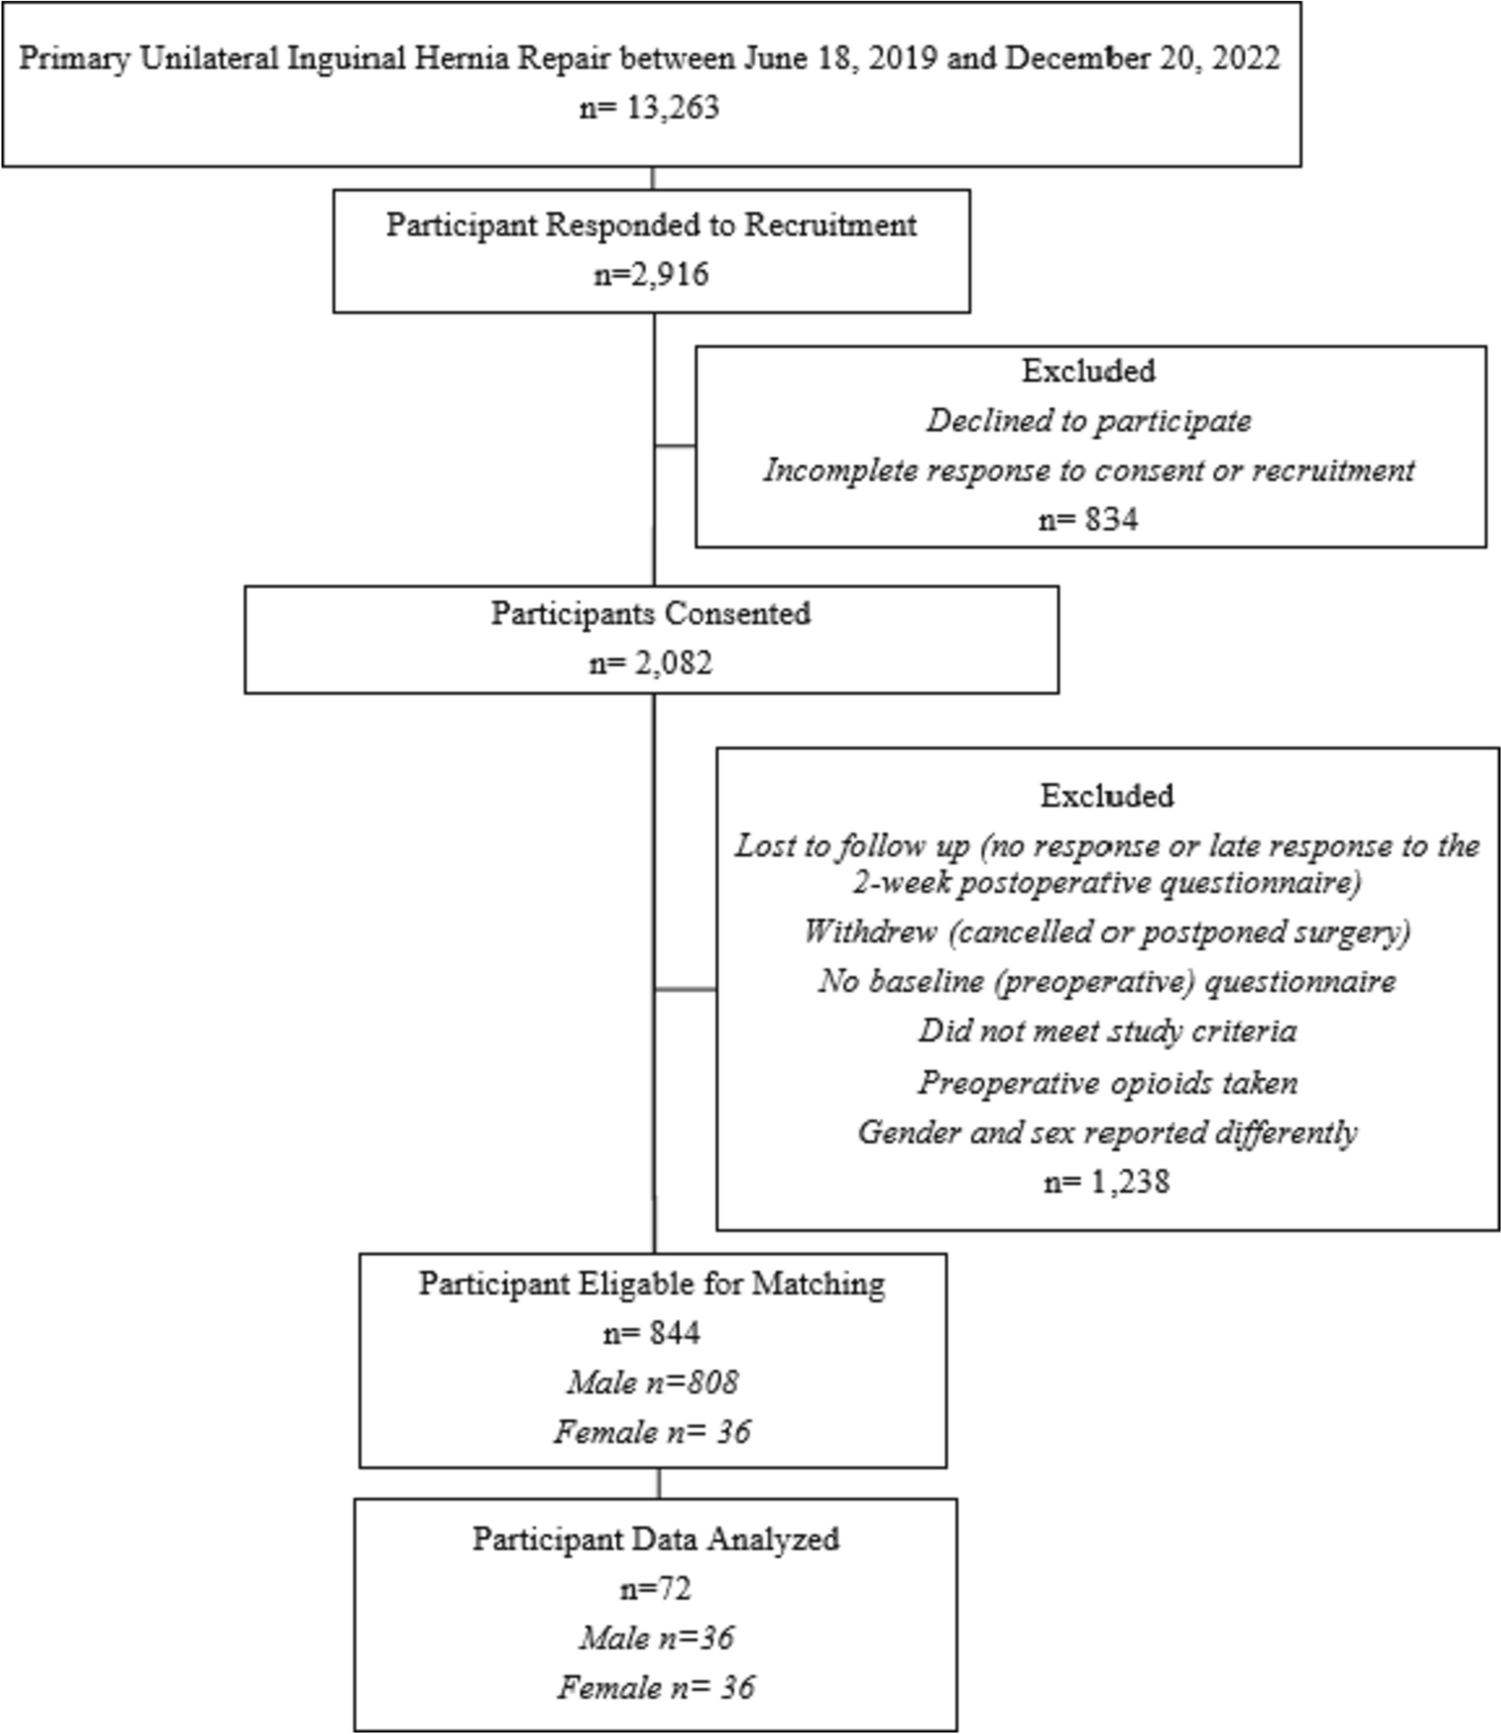 Matching males and females undergoing non mesh primary unilateral inguinal hernia repair: evaluating sex differences in preoperative and acute postoperative pain